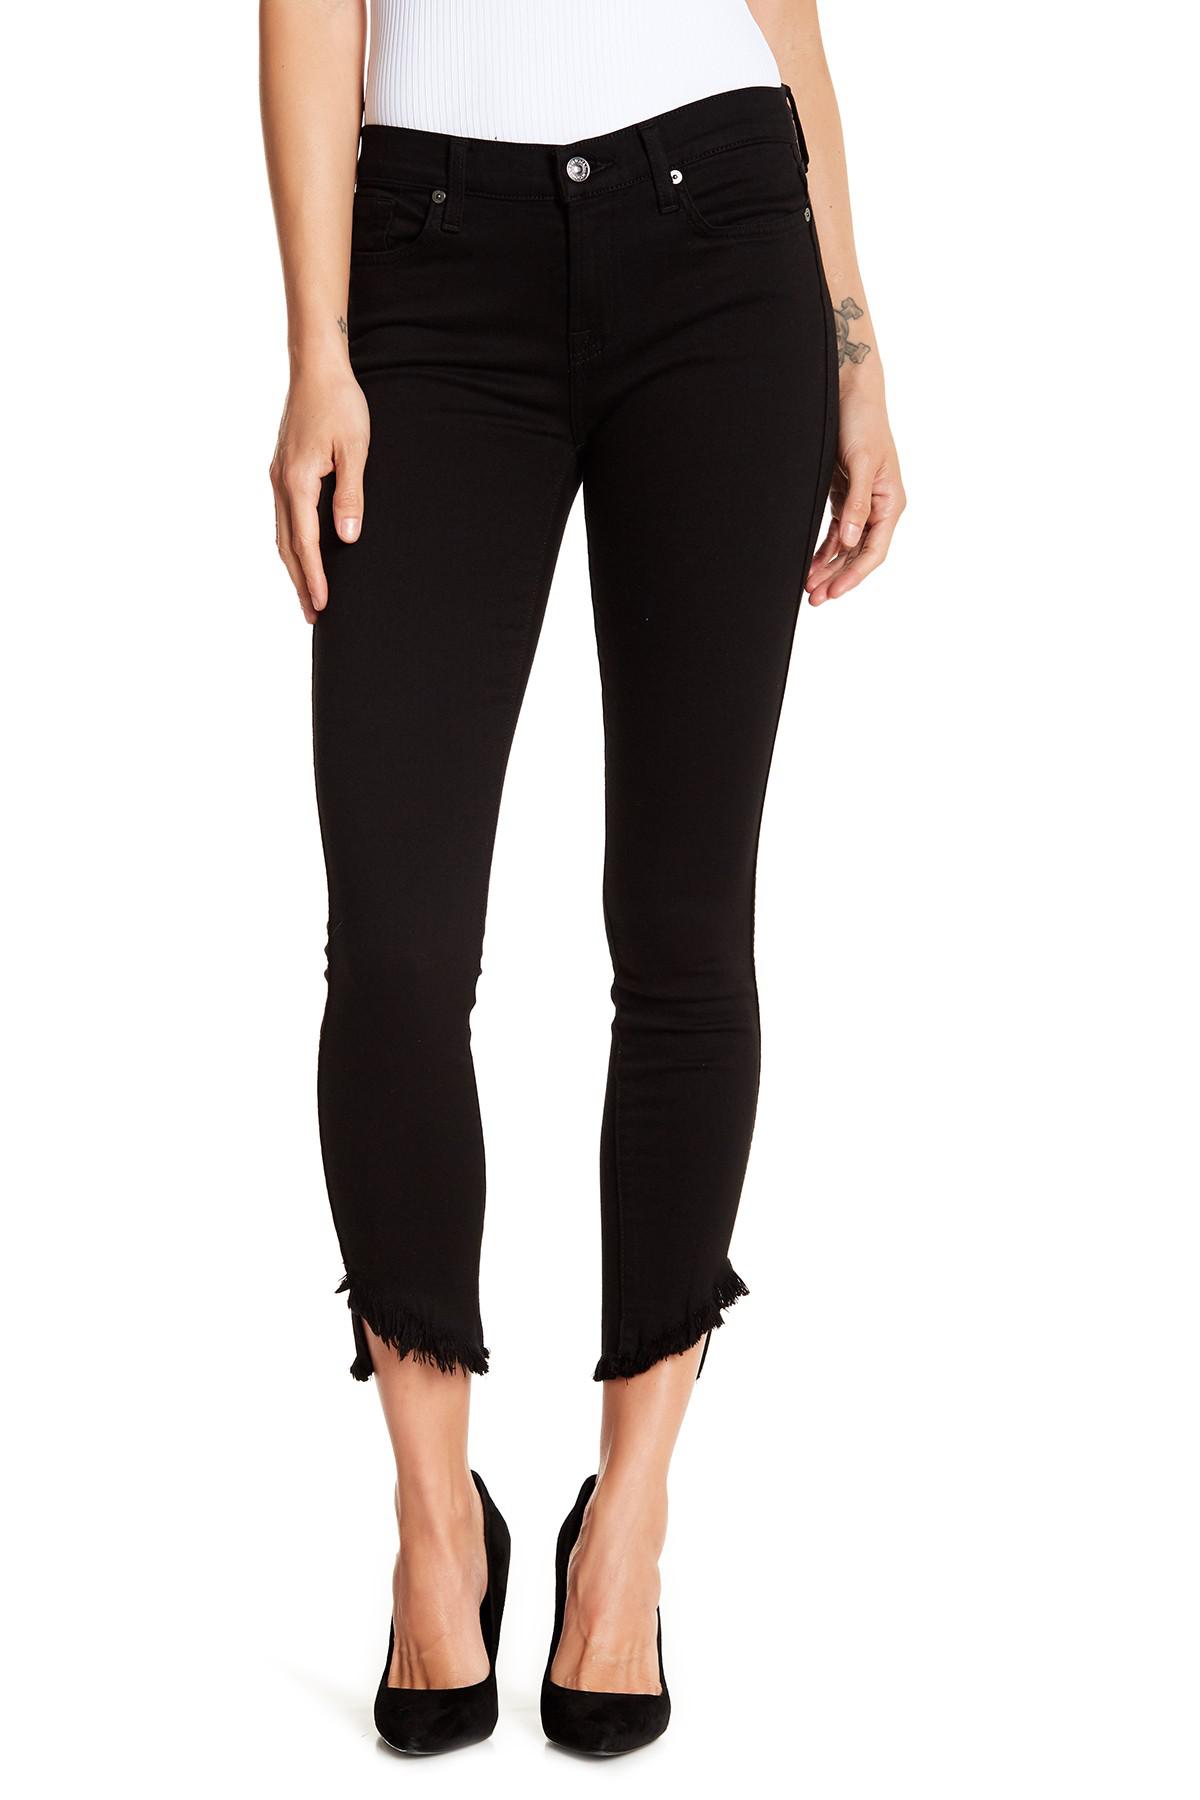 7 For All Mankind Gwen Frayed Angled Hem Skinny Jeans in Black | Lyst